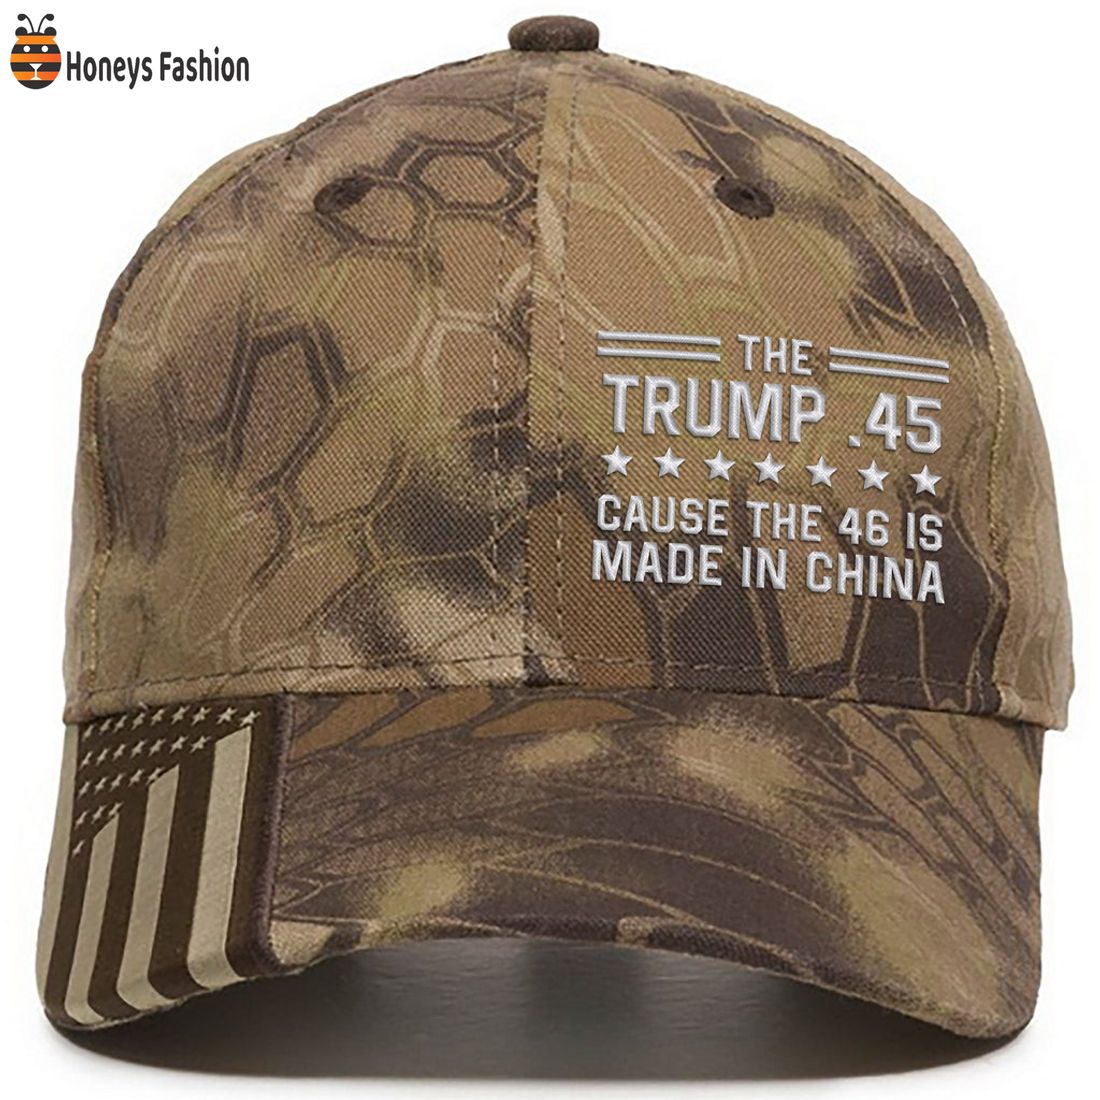 HOT The Trump 45 Cause The 46 Is Made In China Classic Cap